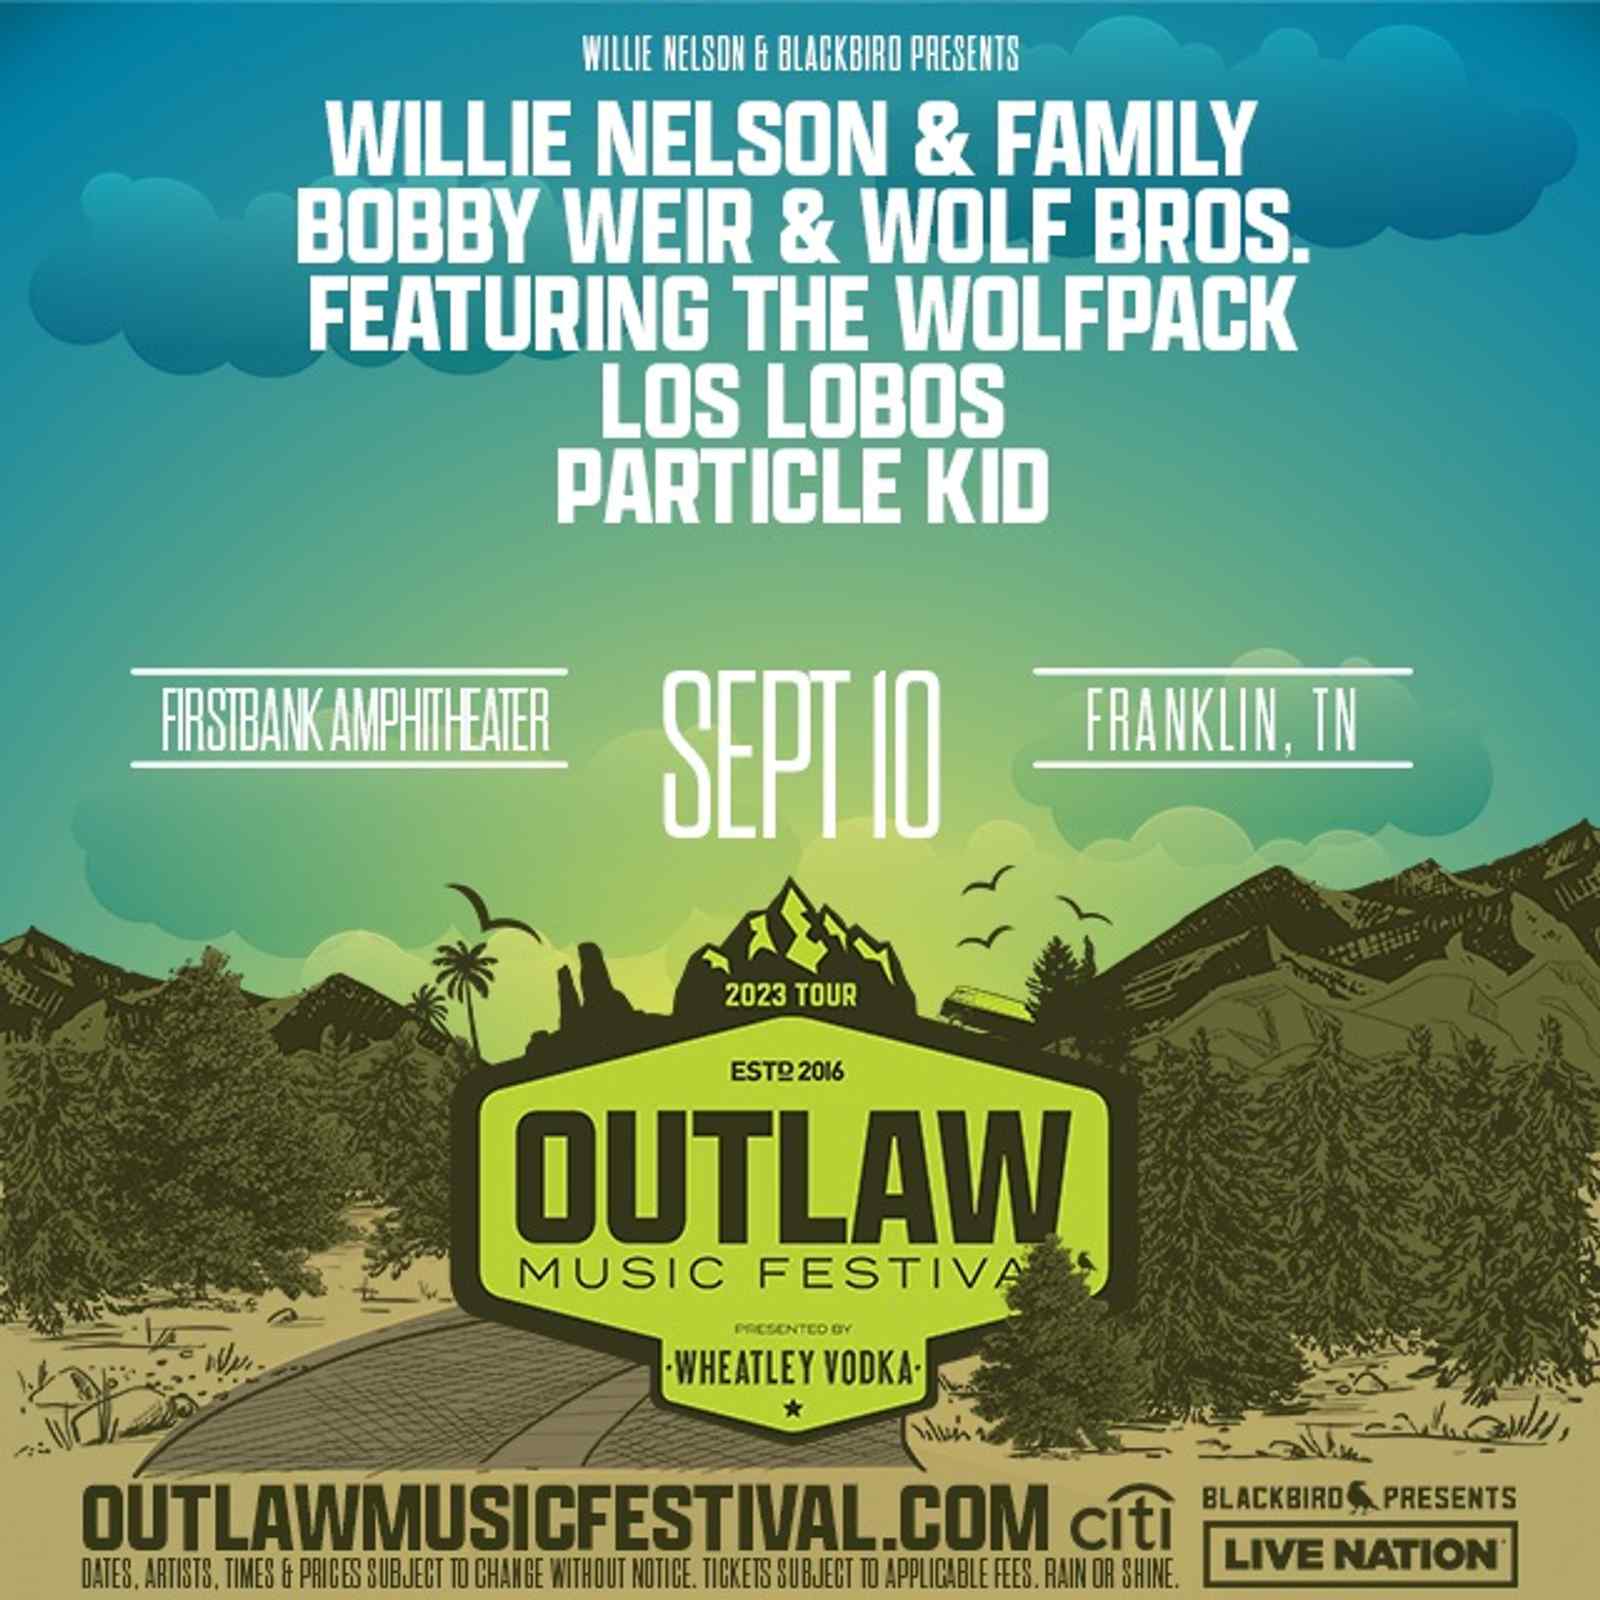 Outlaw Music Festival featuring Willie Nelson& Family with special guests Bobby Weir and Wolf Bros. featuring The Wolfpack, Los Lobos, and Particle Kid - 5:30 PM